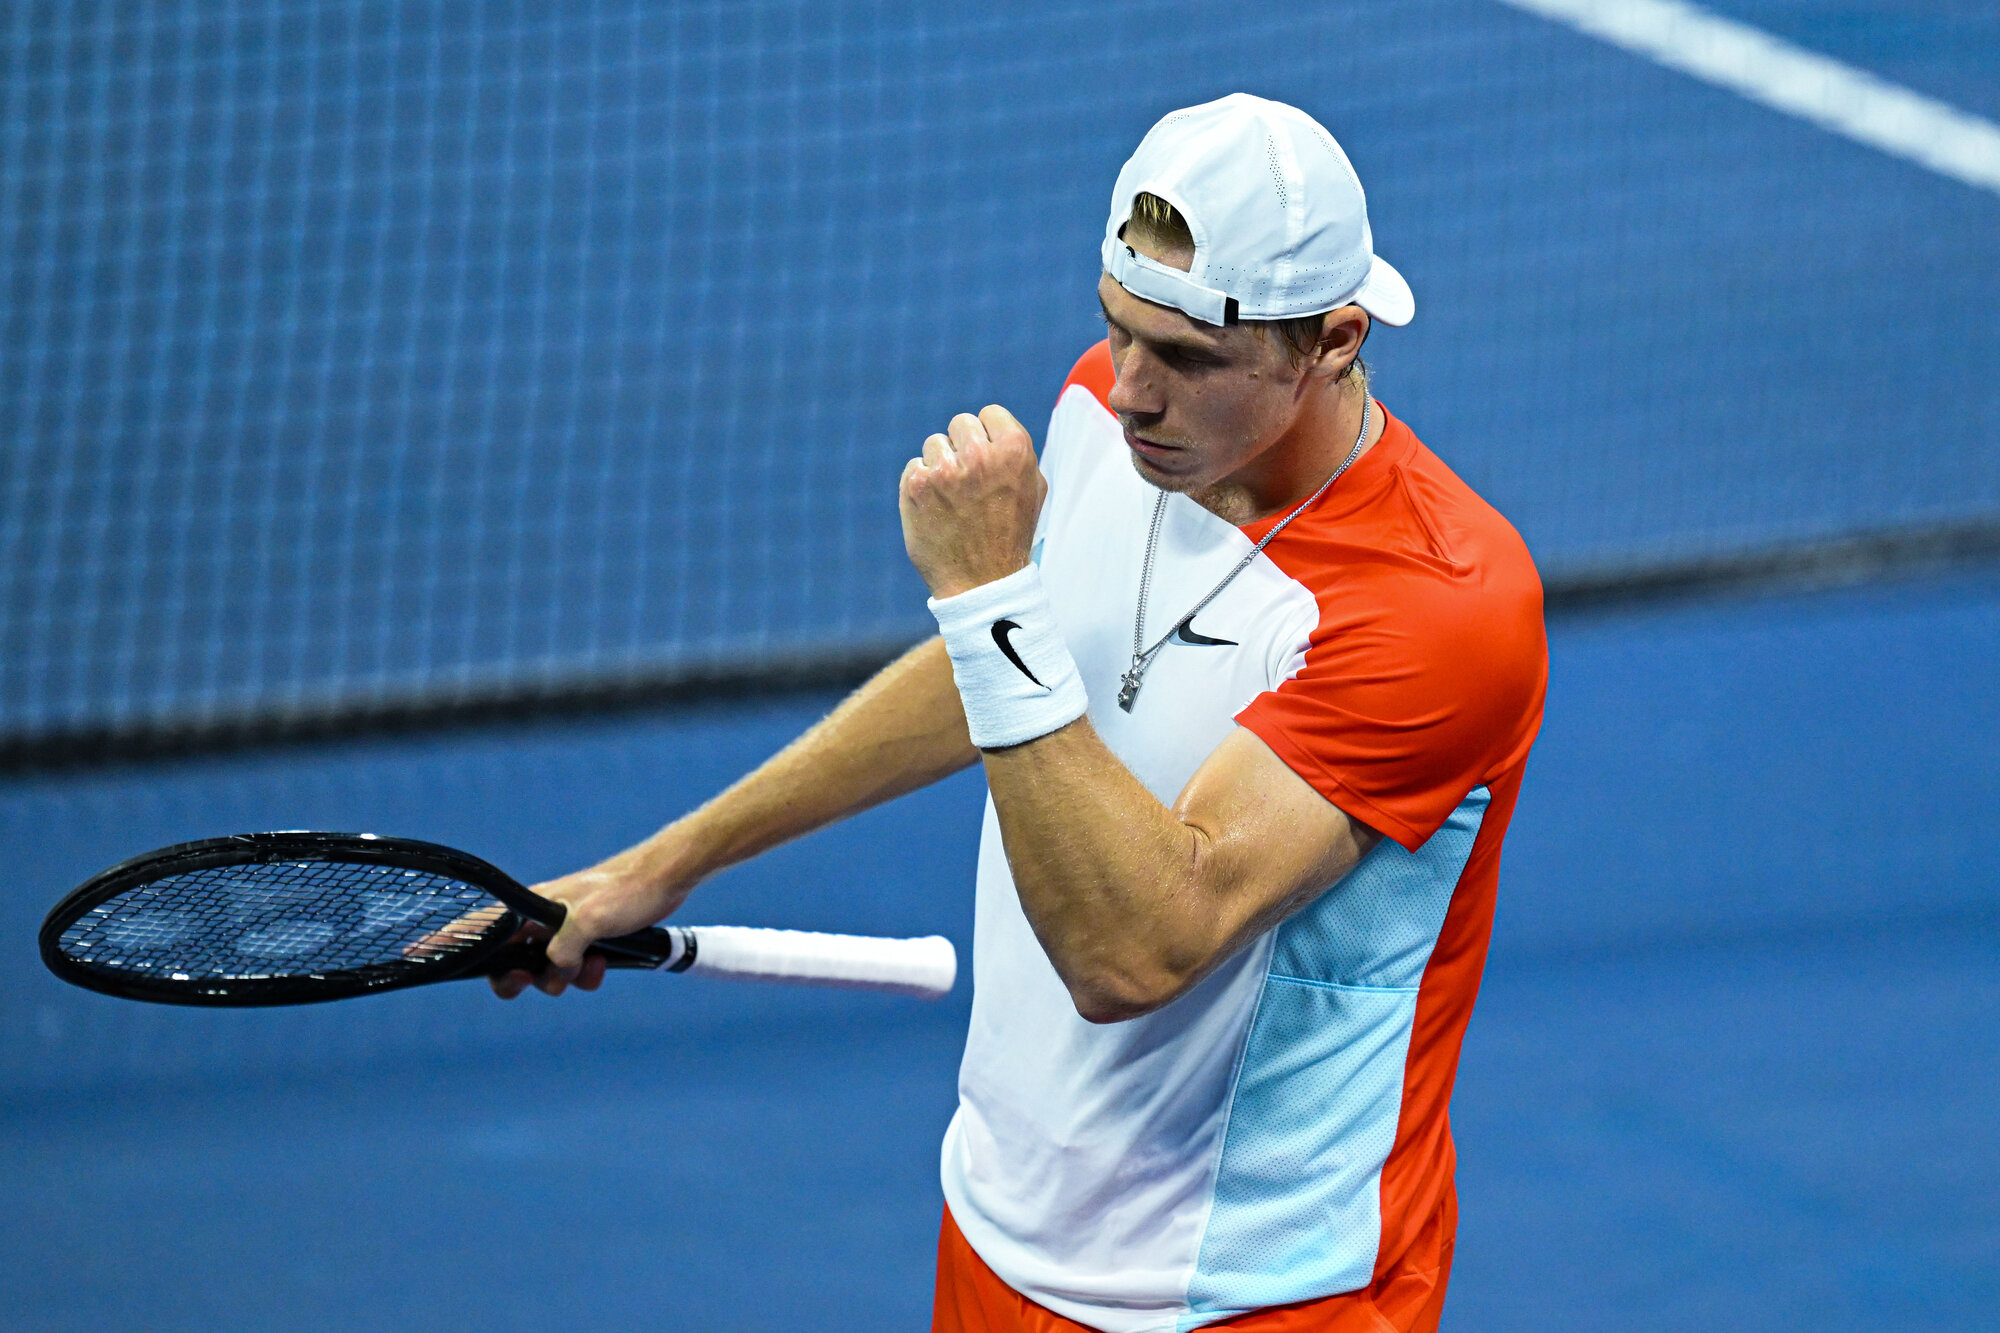 Shapovalov to Play for Seoul Title